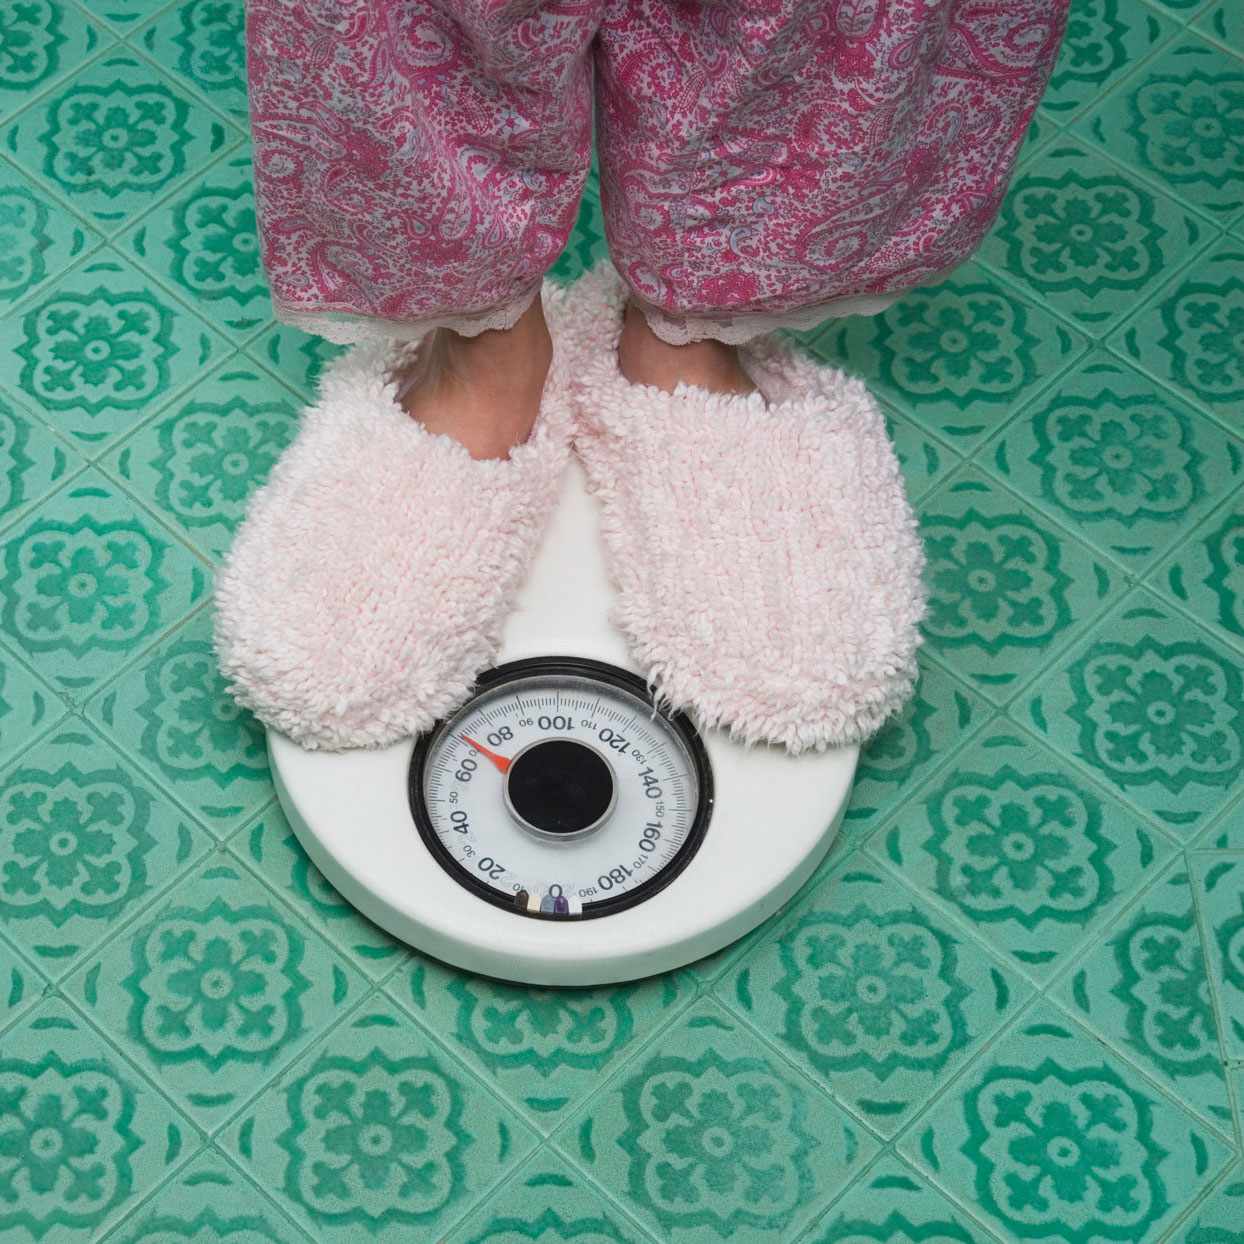 feet with slippers on, standing on a scale